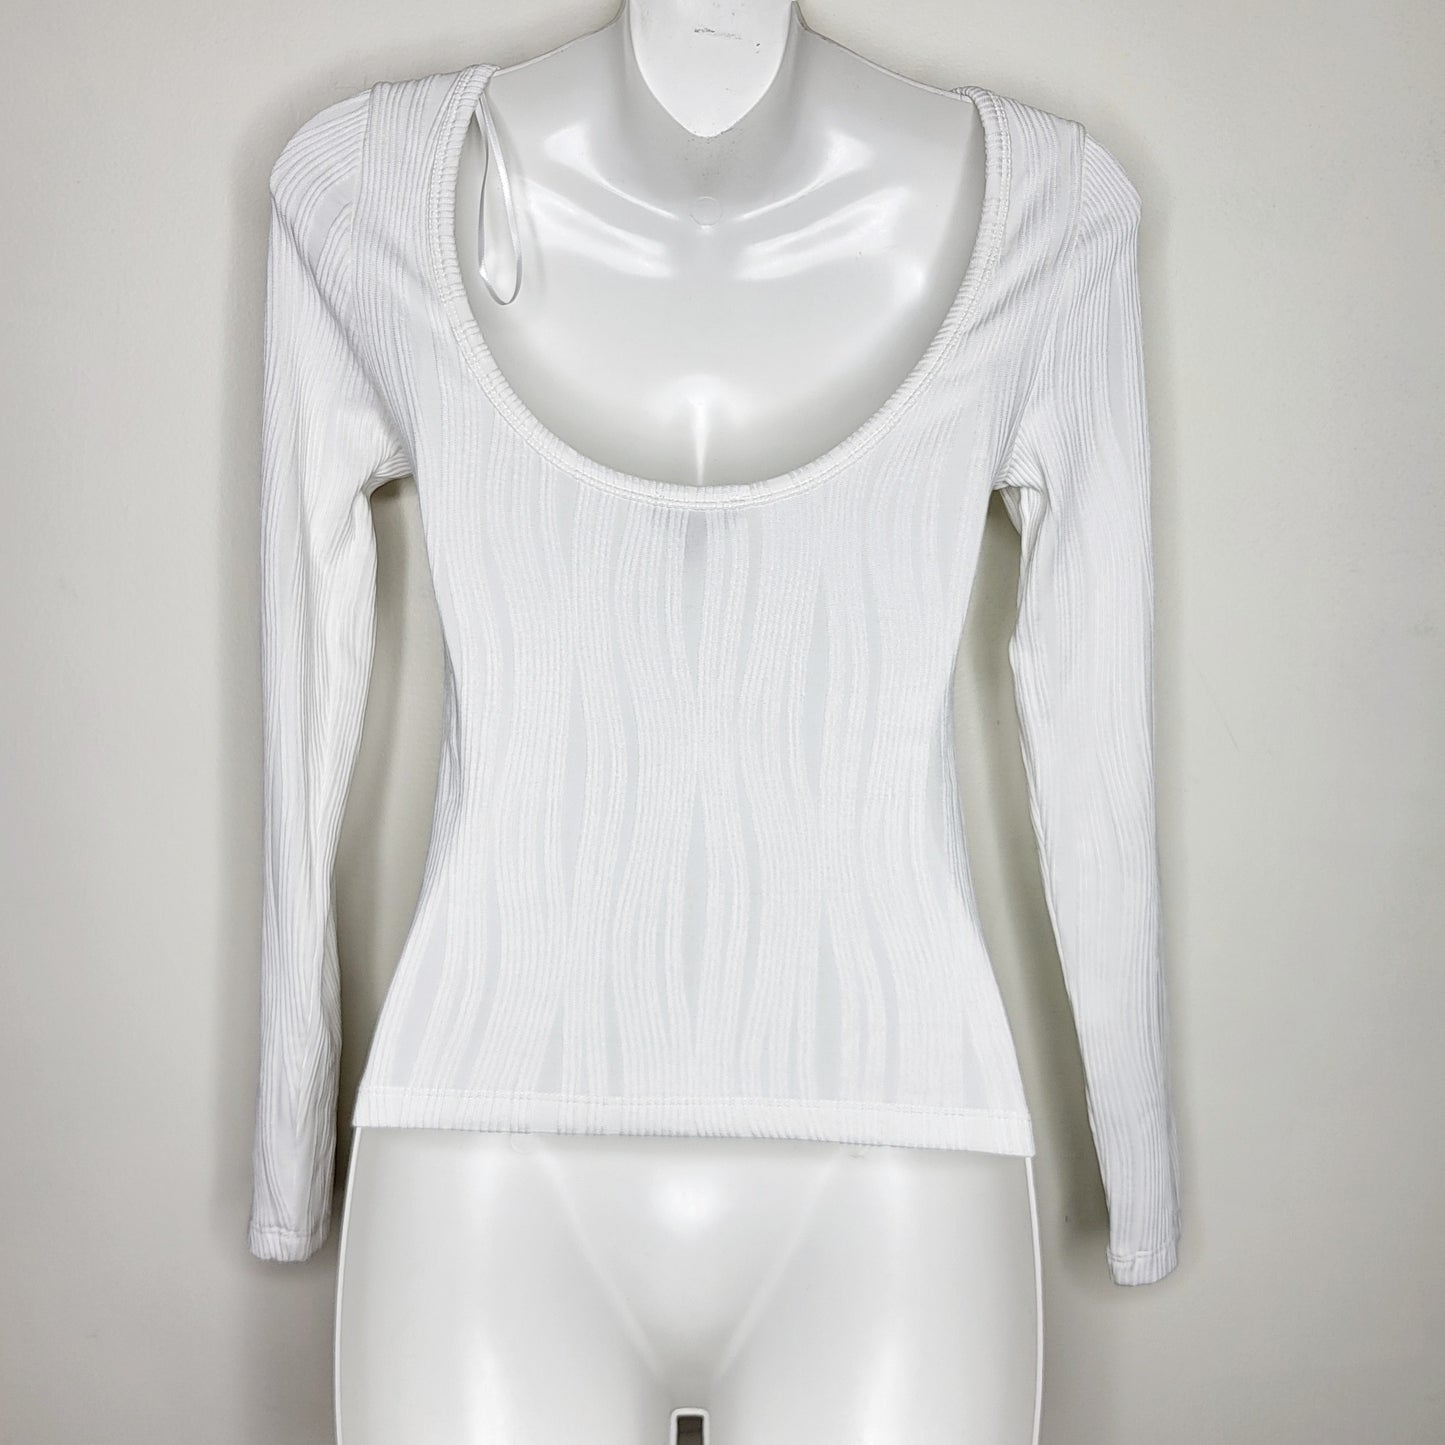 CHND2 - NEW - Dynamite white open back textured long sleeved top, size XS